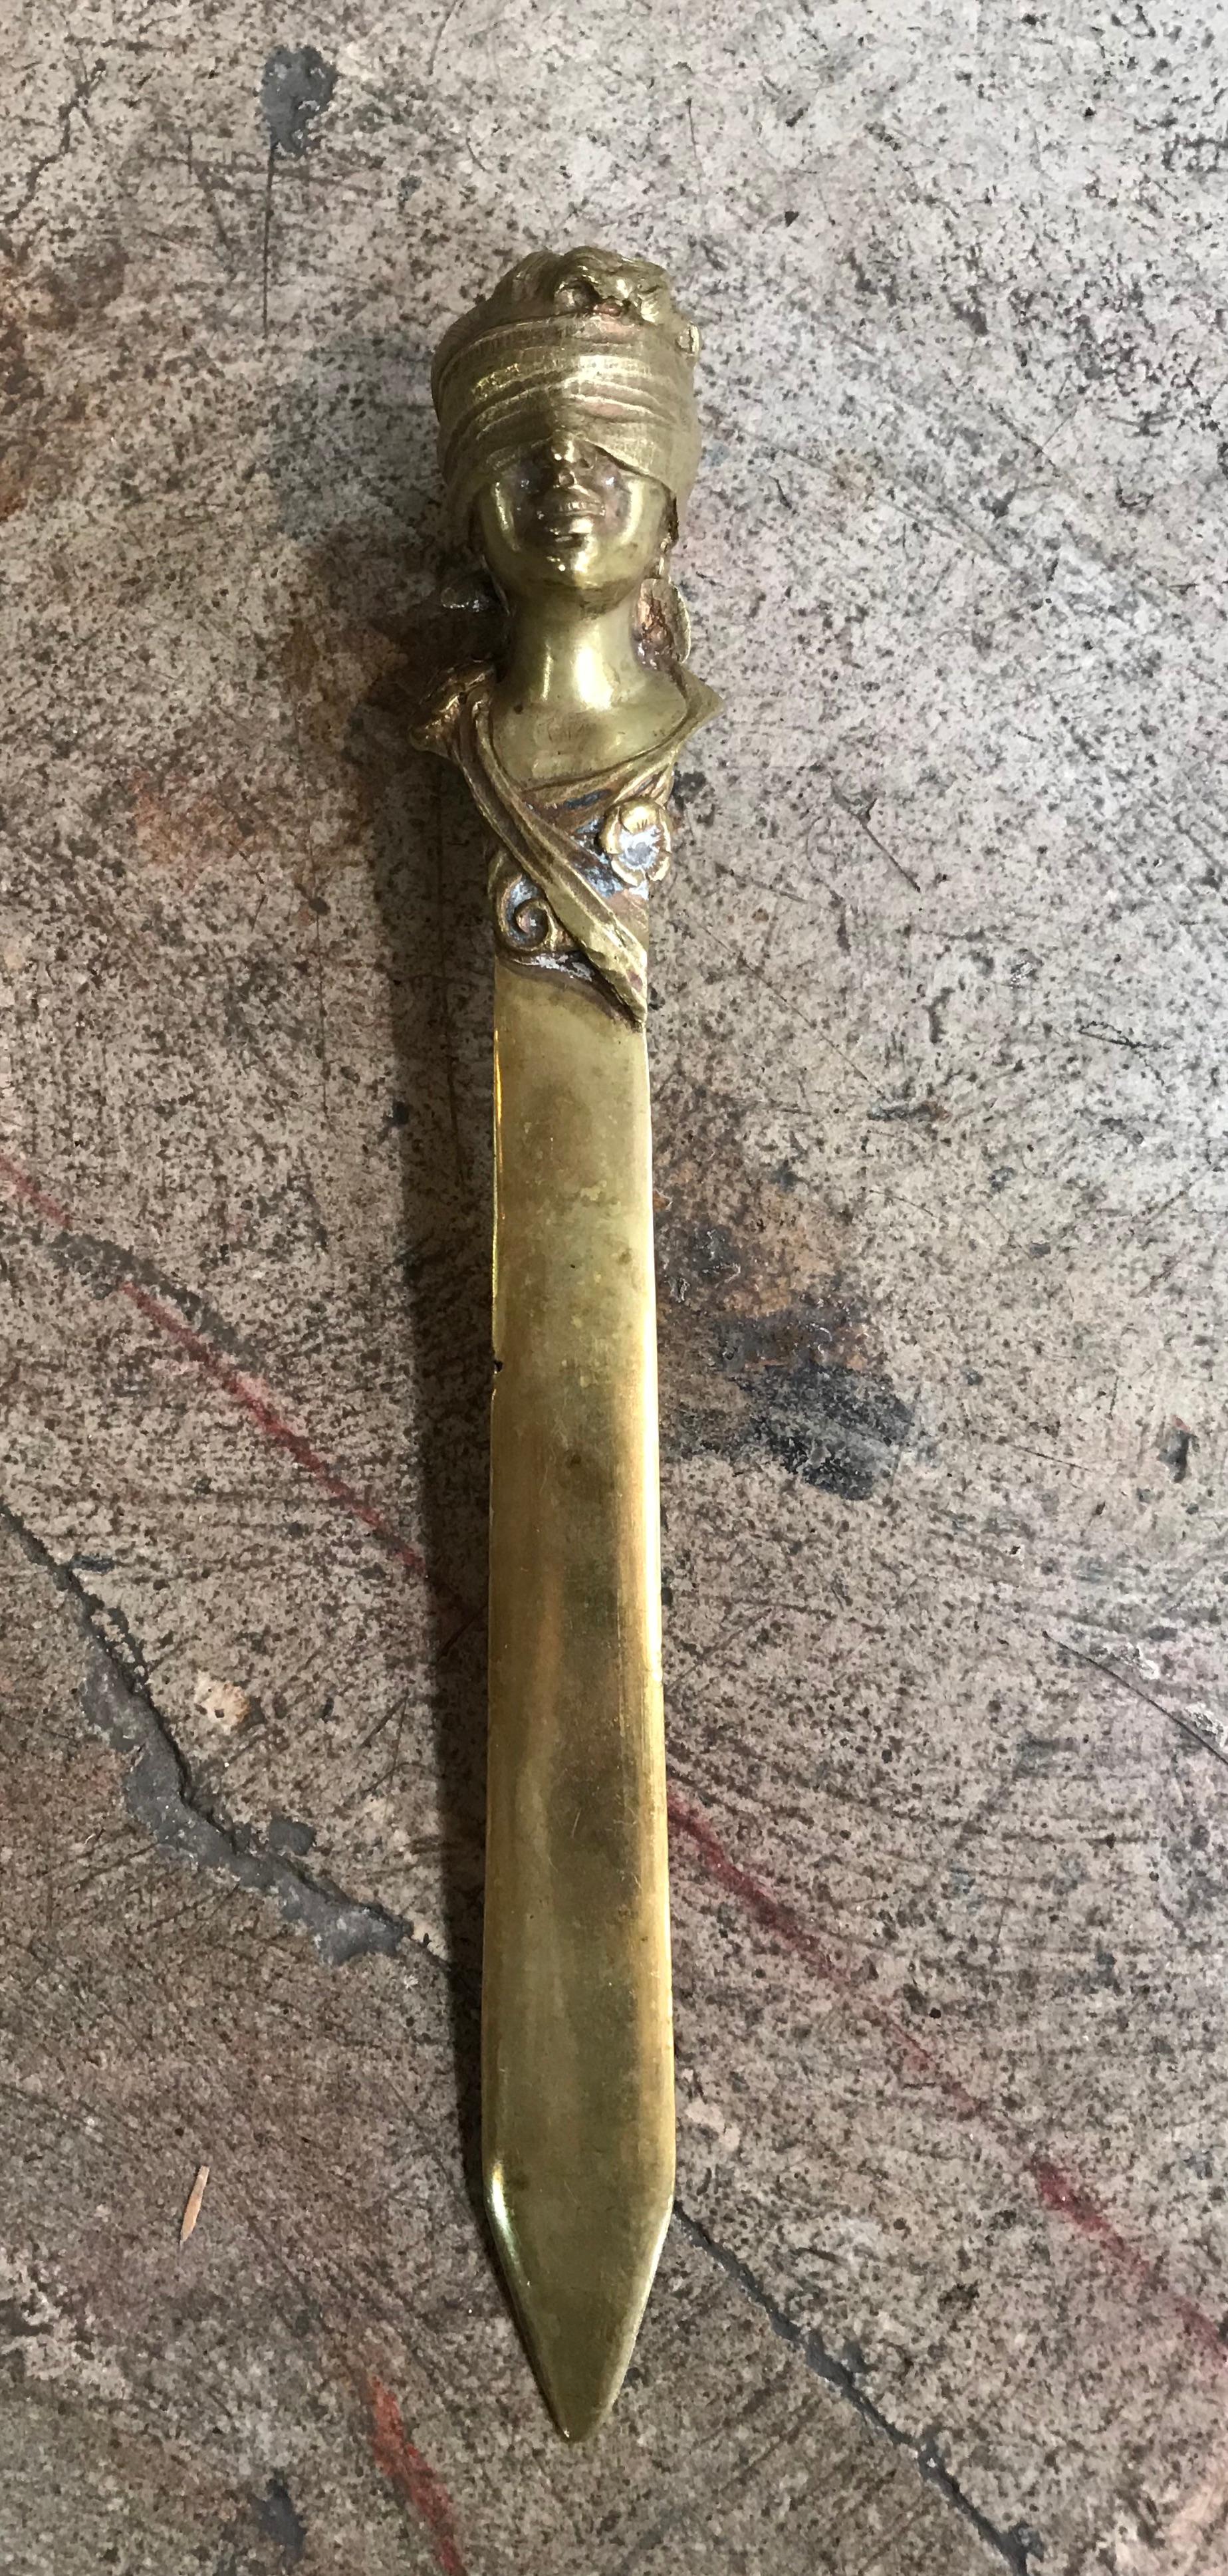 This unique desk accessory in the way of a solid brass braided and sculptured letter opener is a divine way to open up mail and accept checks. It is from the period of Art Nouveau and has good weight to it. This makes a great gift! It is vintage